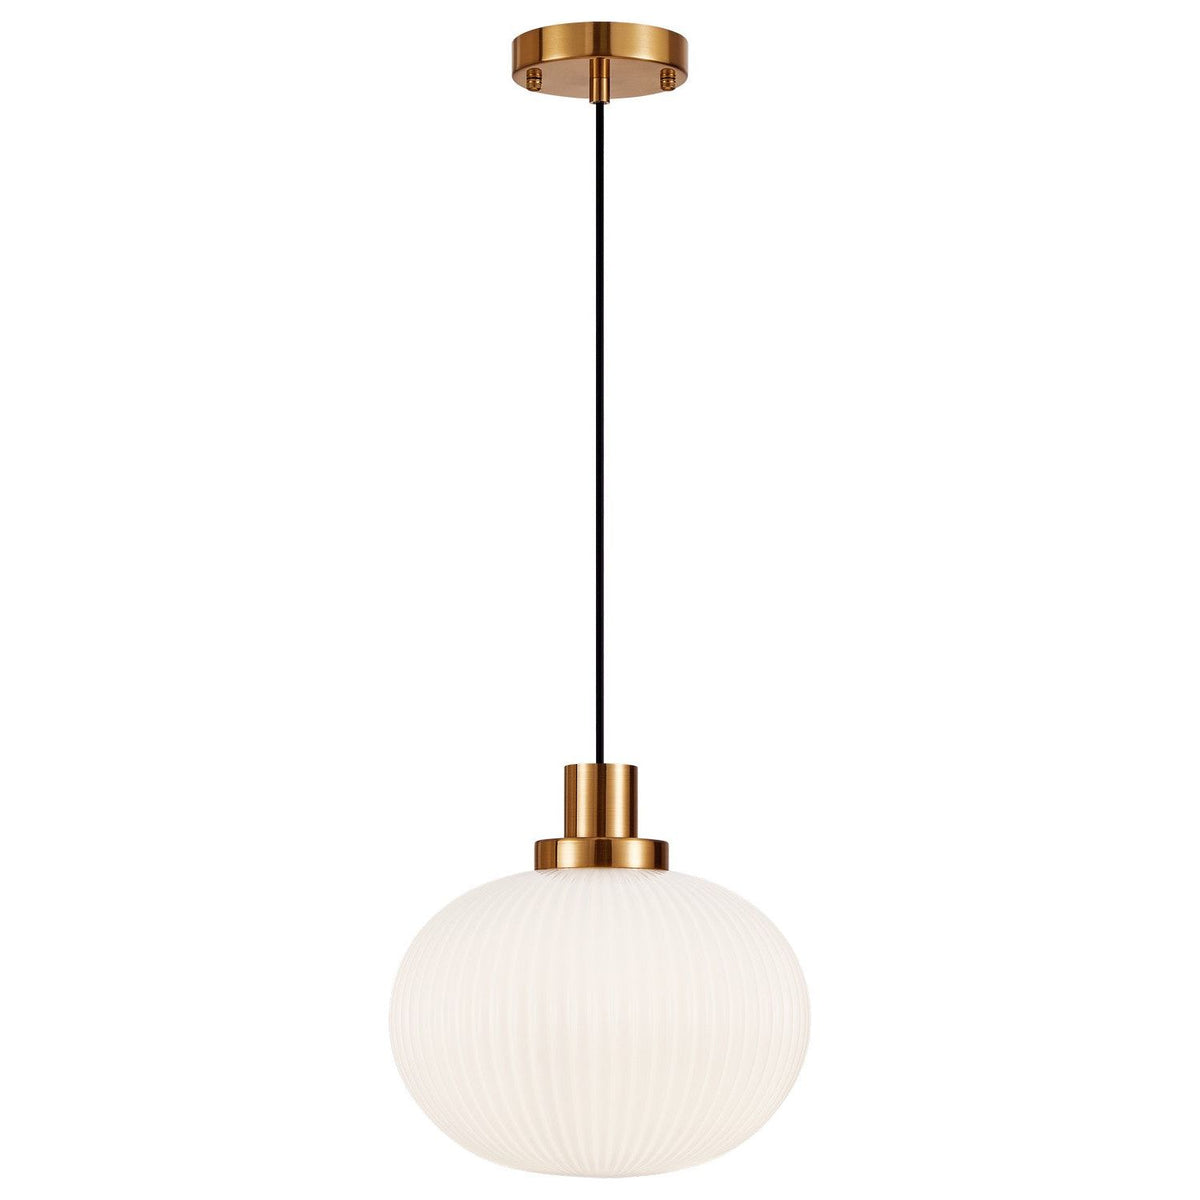 Matteo Canada - C61003AGOP - One Light Pendant - Charismo - Aged Gold Brass